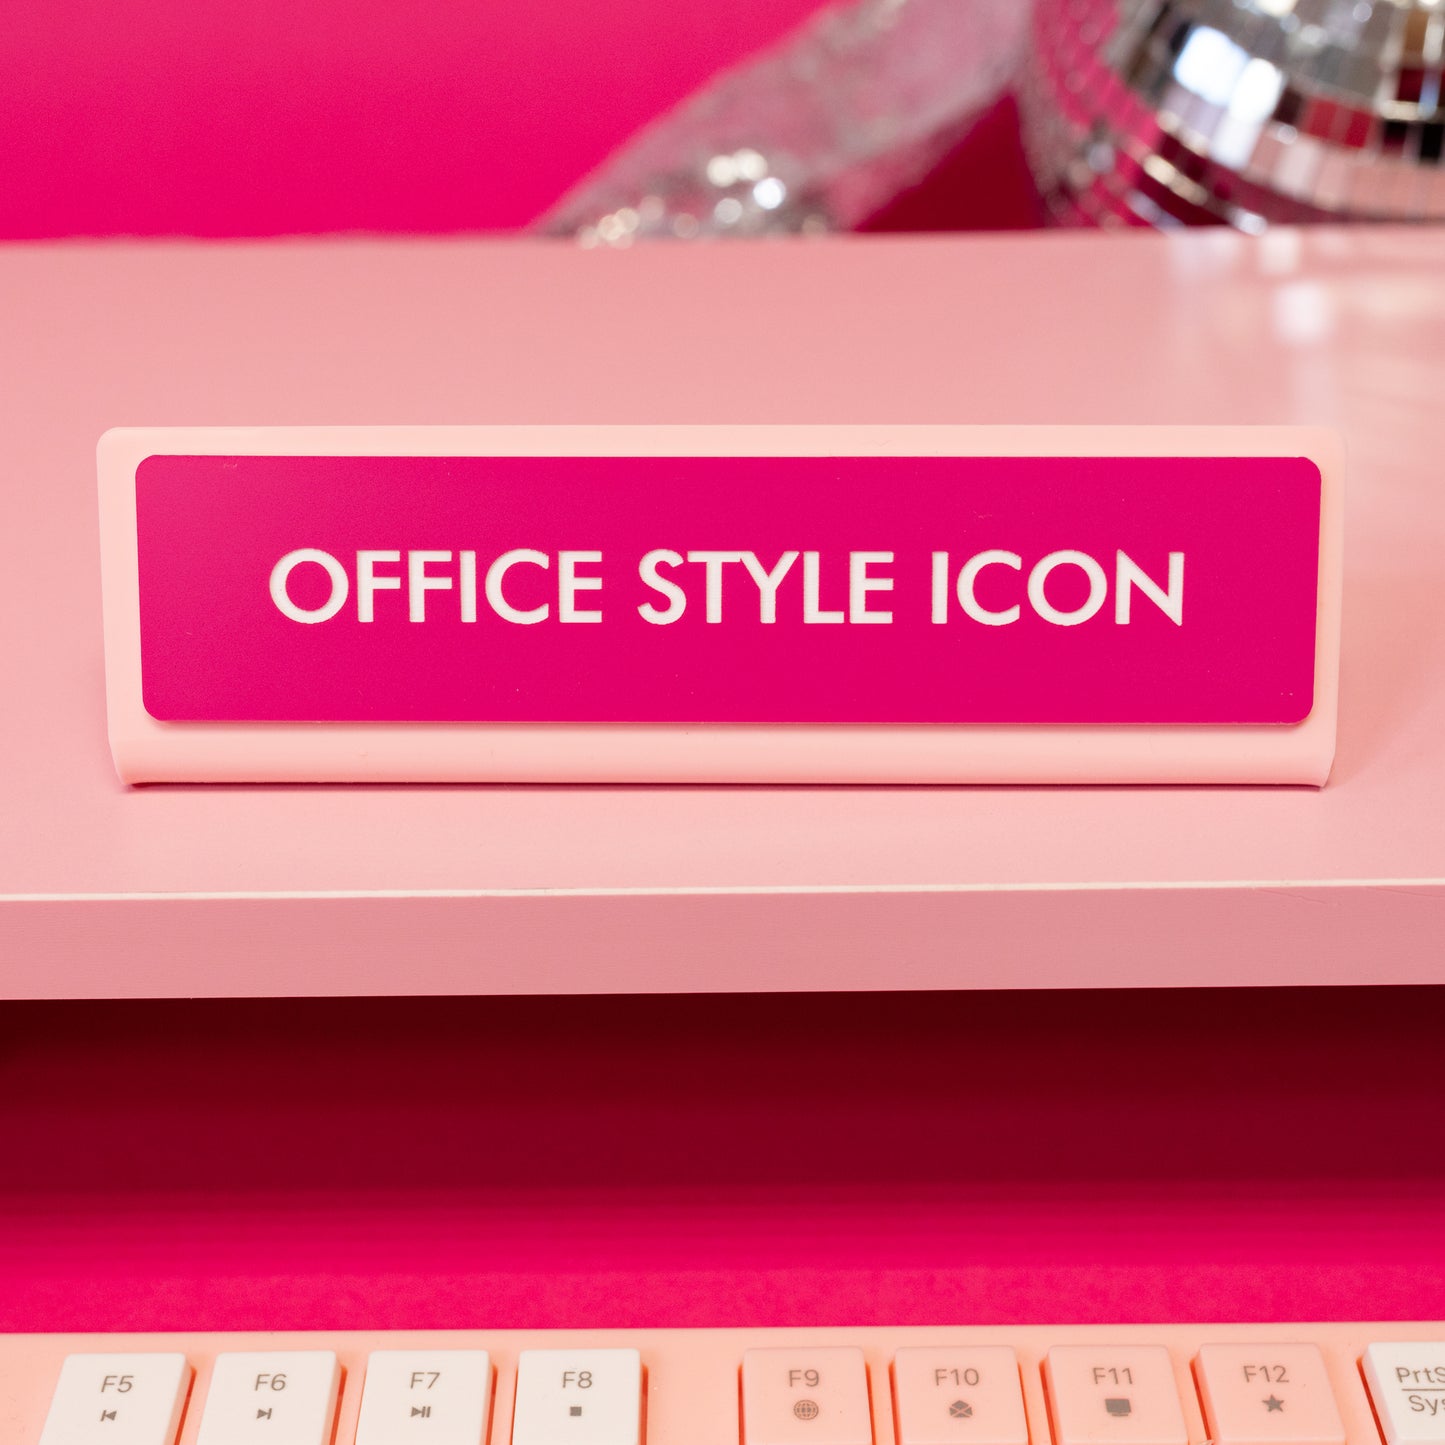 office style icon pink and light pink desk sign